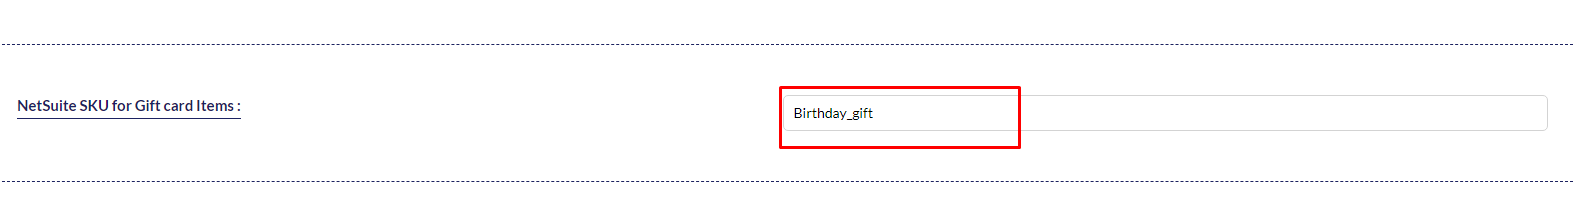 Add setting for Gift Card